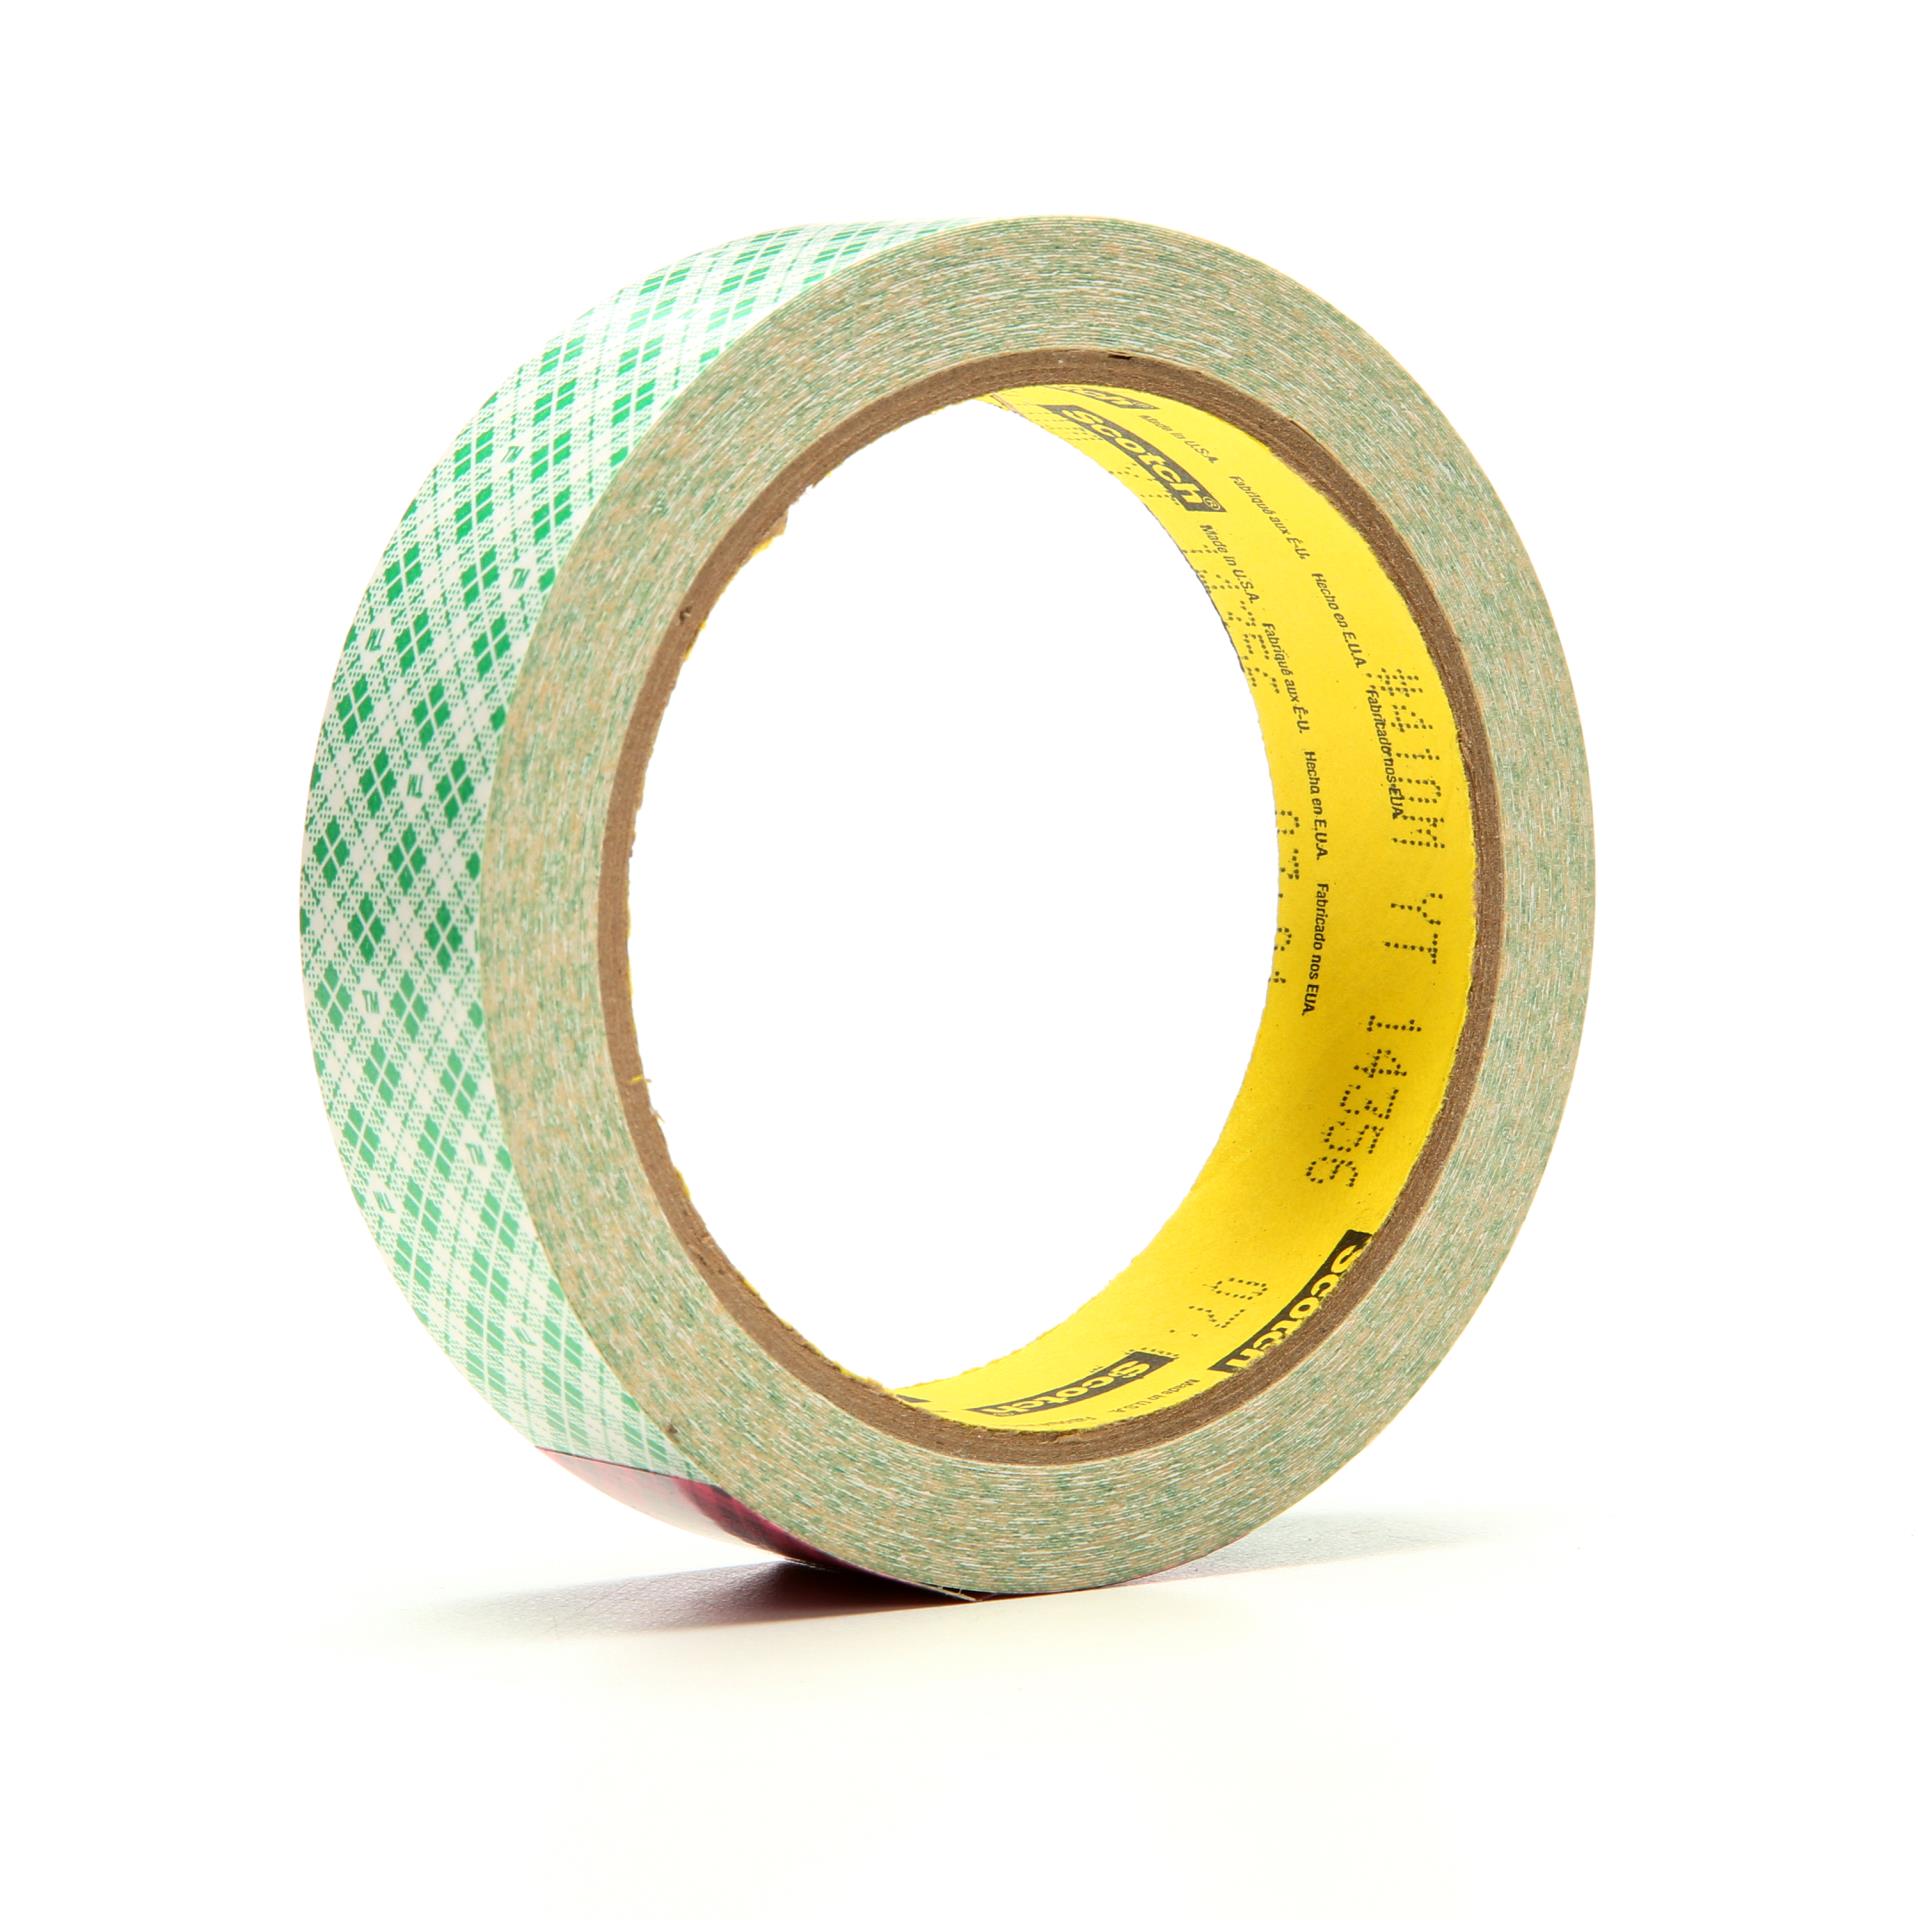 410M 3 Inch Core Scotch Double-Coated Tissue Tape 1 Inch x 36 Yards 